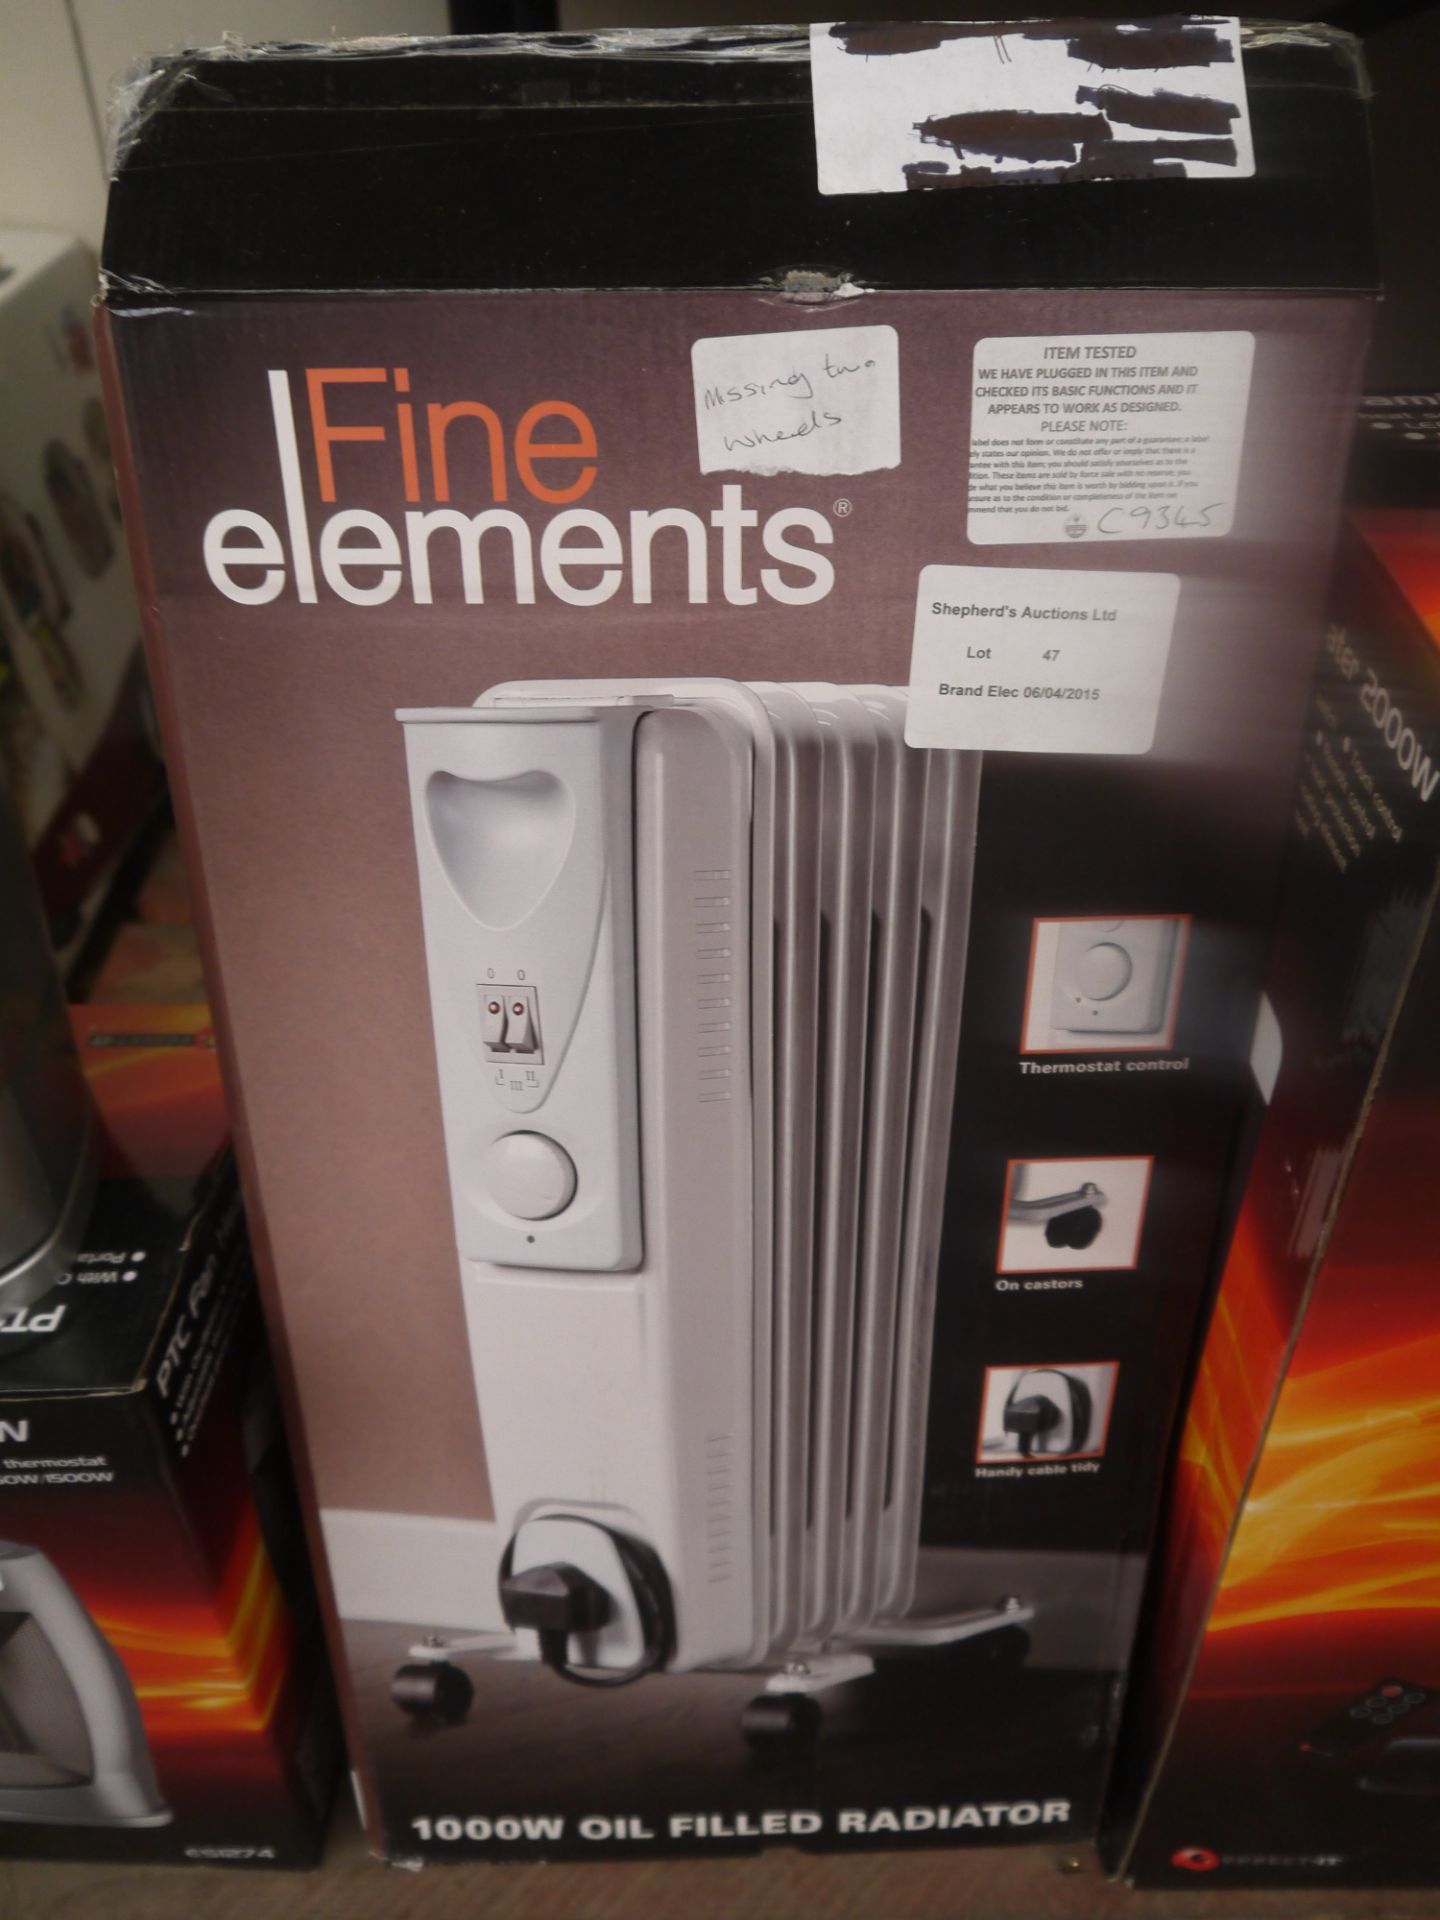 Fine elements 1000w oil filled radiator, boxed and tested working, missing 2 wheels